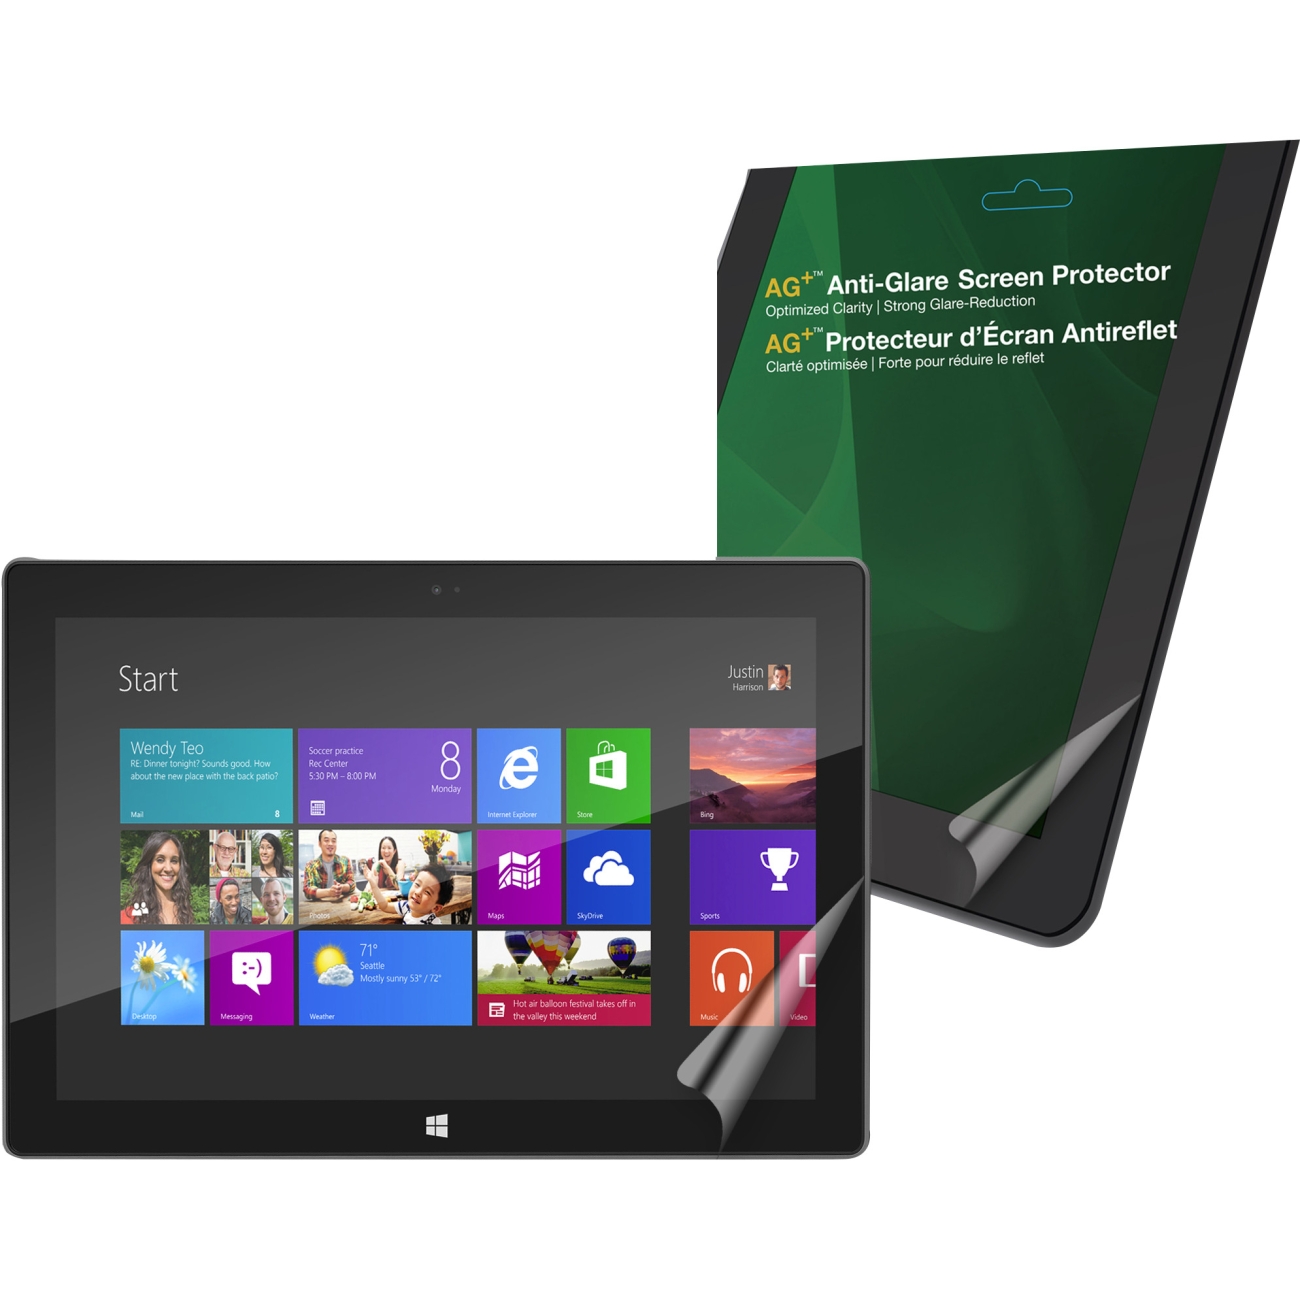 Green Onions Supply AG+ Anti Glare Screen Protector for Microsoft Surface with Windows RT